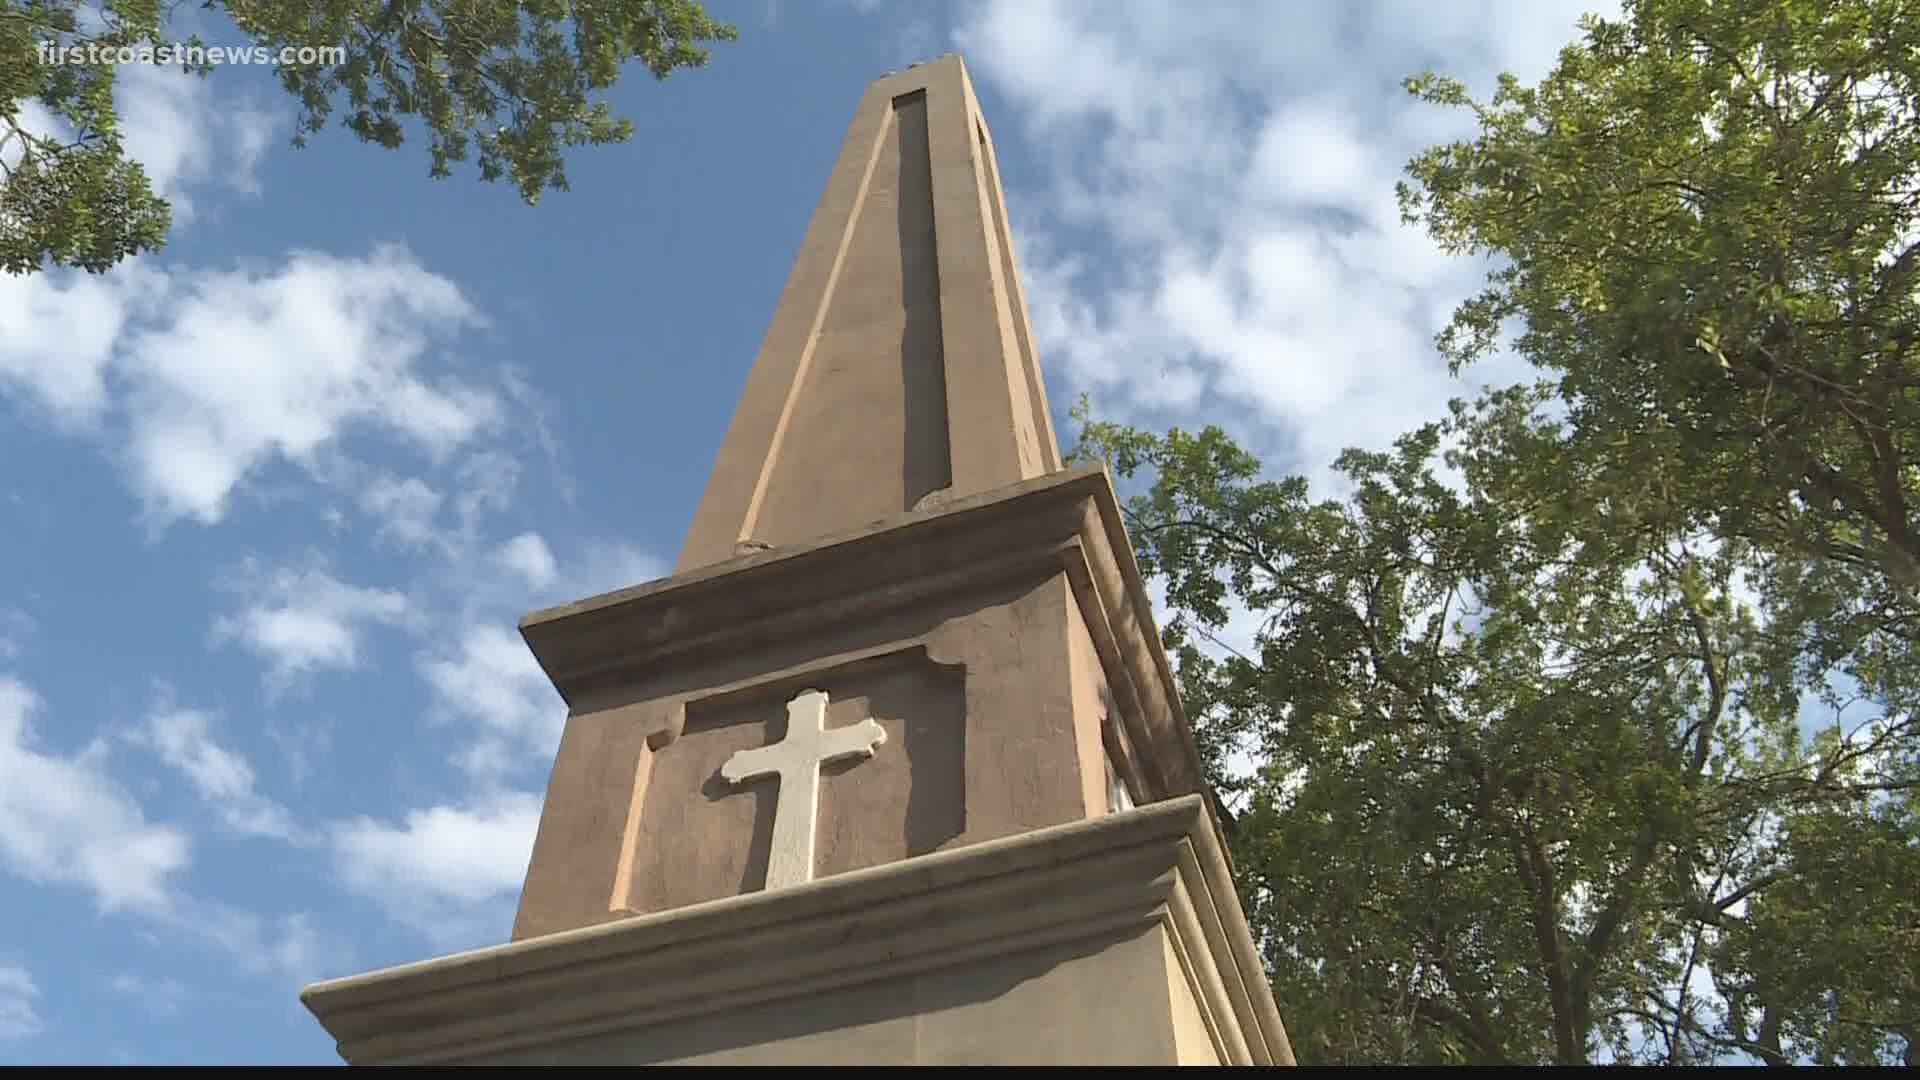 The city commission welcomes input as it plans to decide the future of a downtown monument at an upcoming meeting.